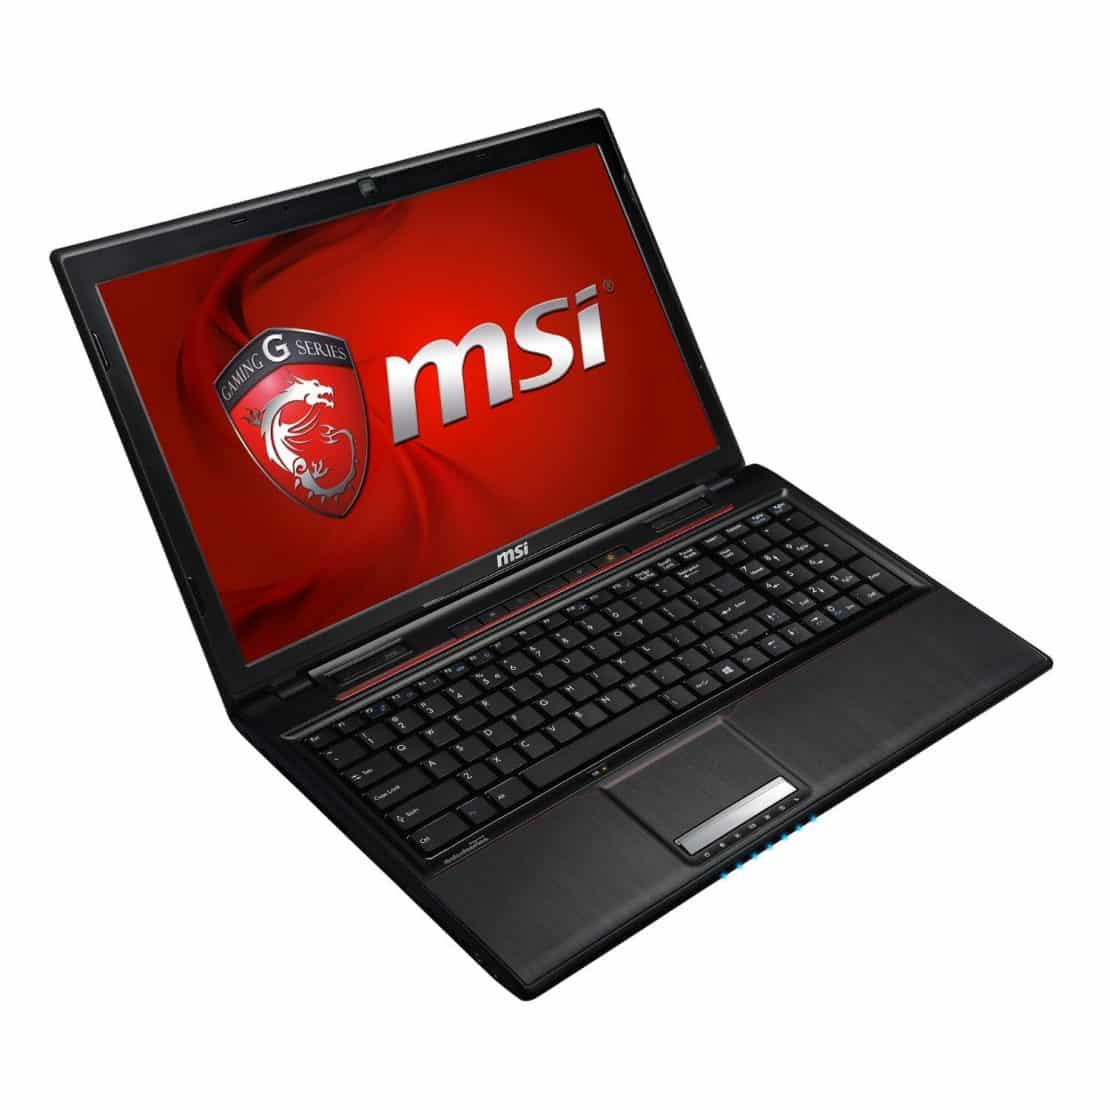 MSI GP60 LEOPARD-010 Gaming Laptop - Cheap Gaming Laptops Under 1000 - Best Gaming Laptops for Less Than $1000